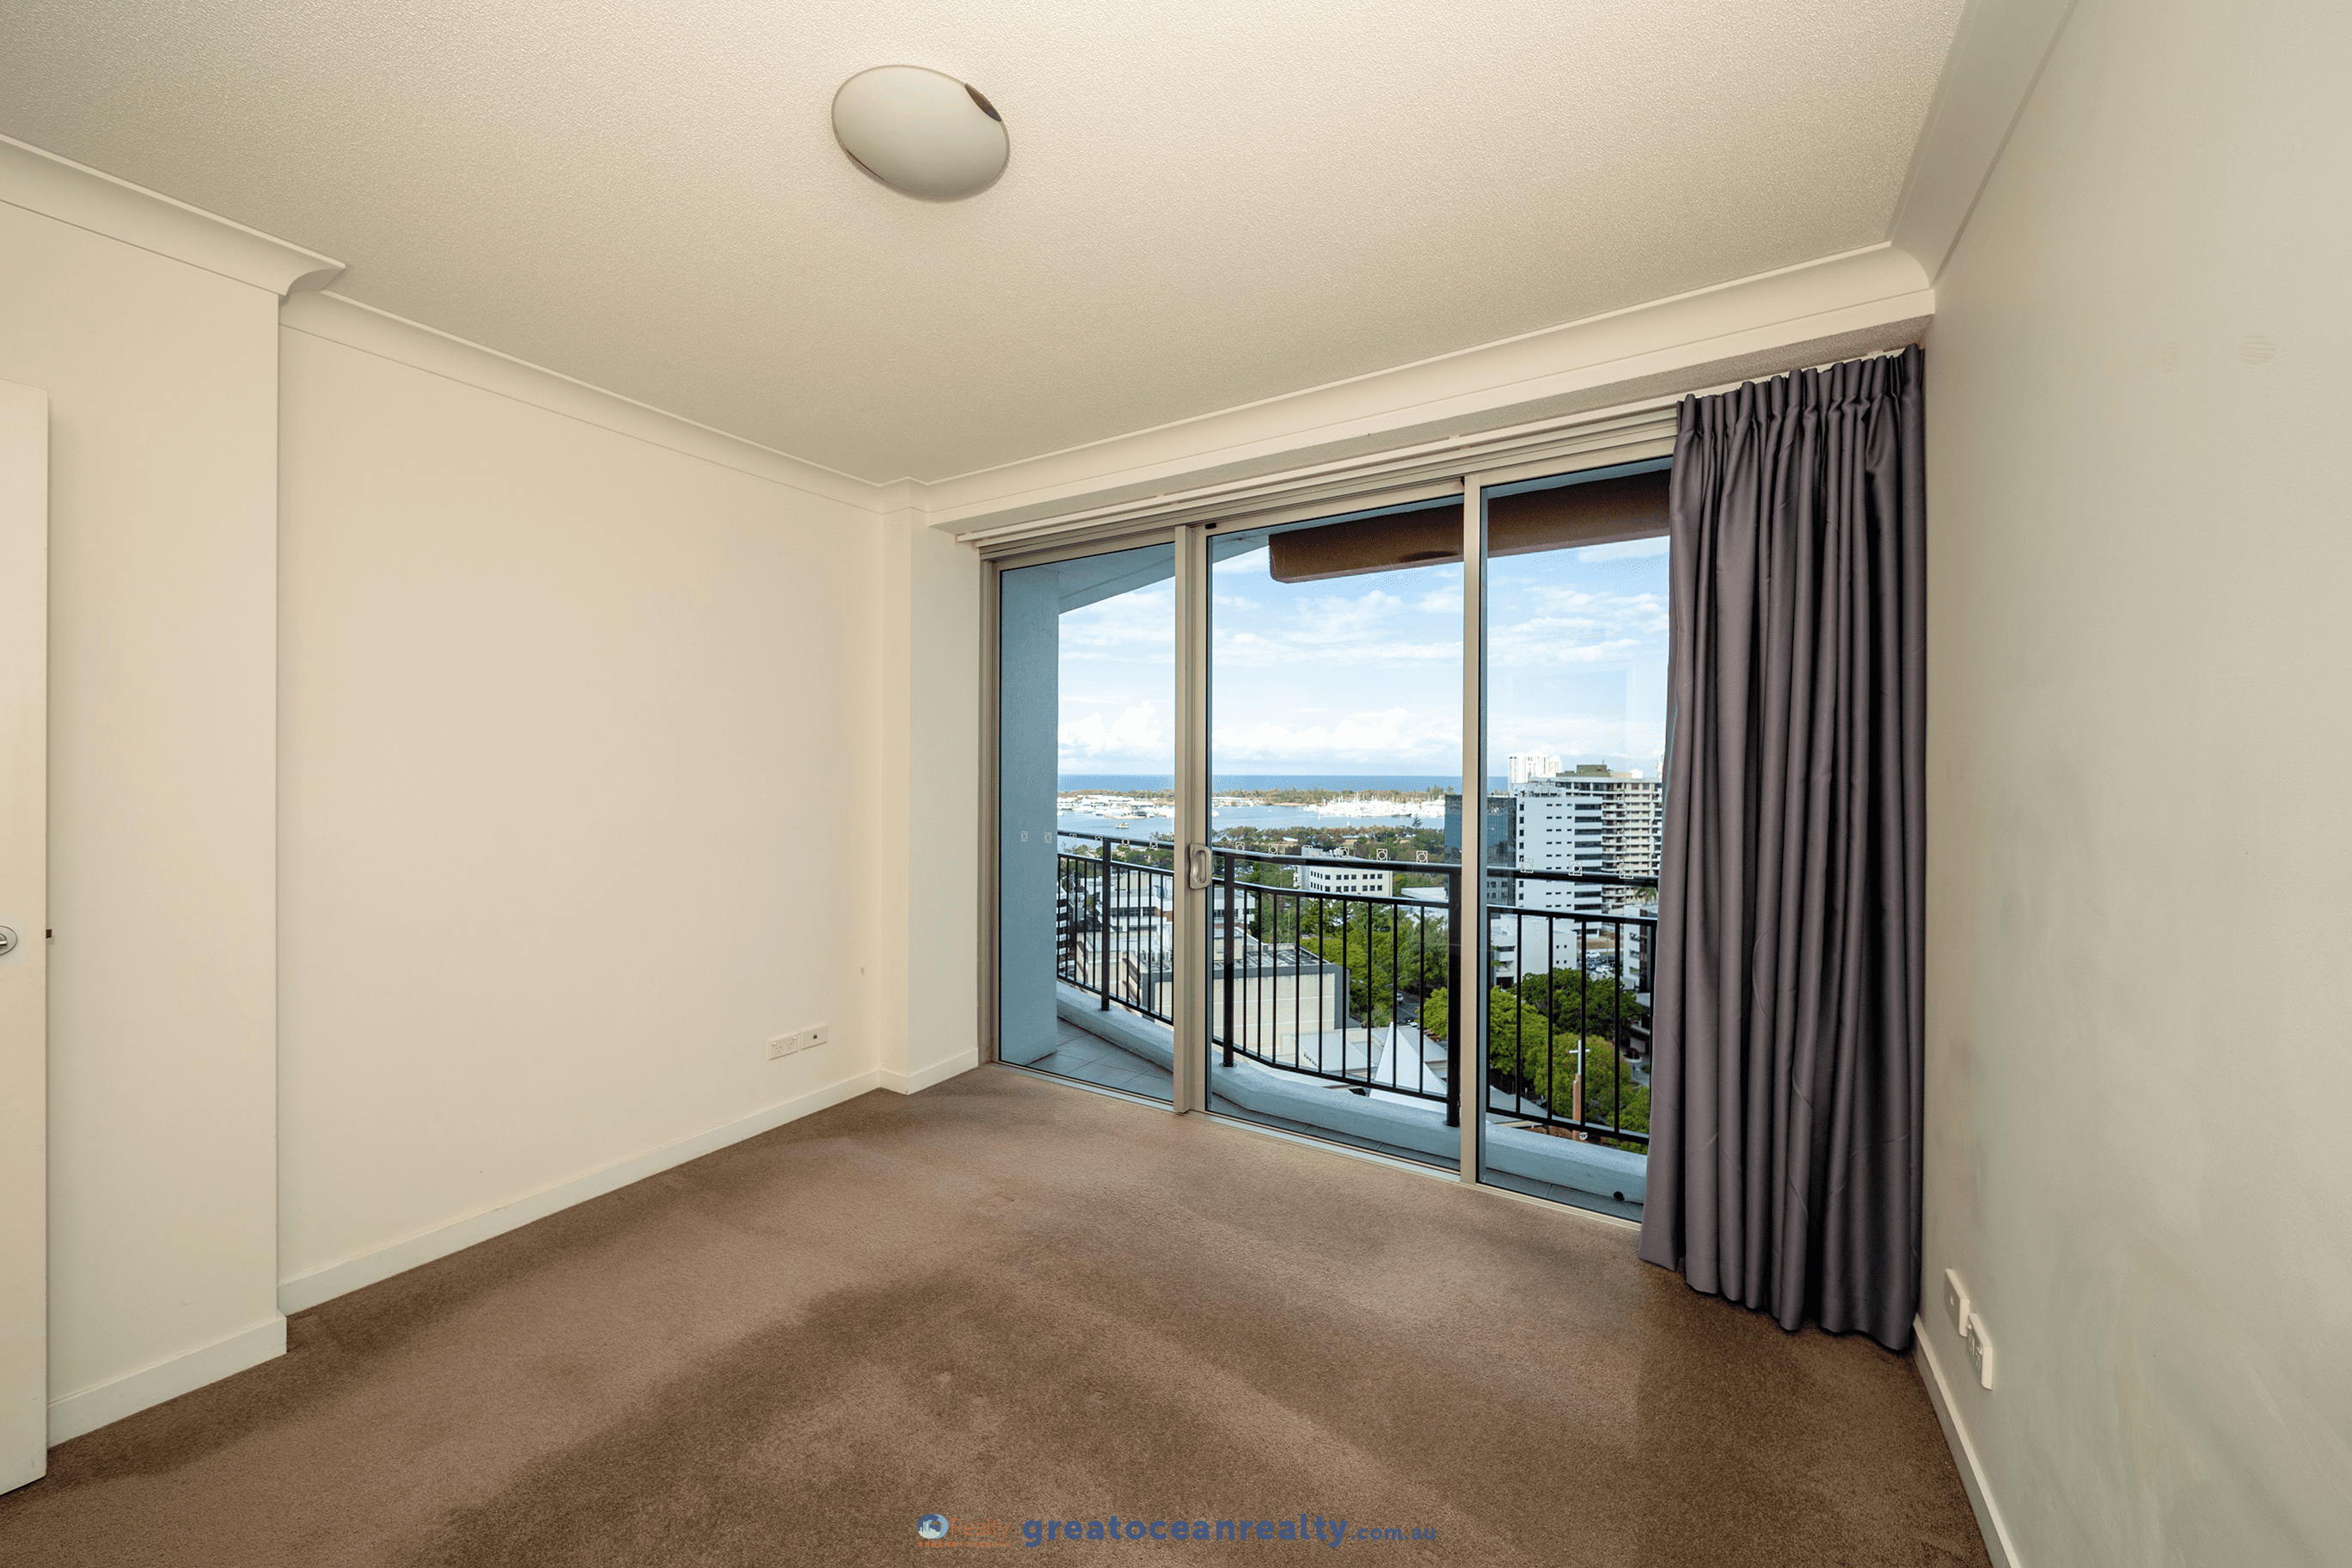 1126/56 SCARBOROUGH STREET, SOUTHPORT, QLD 4215